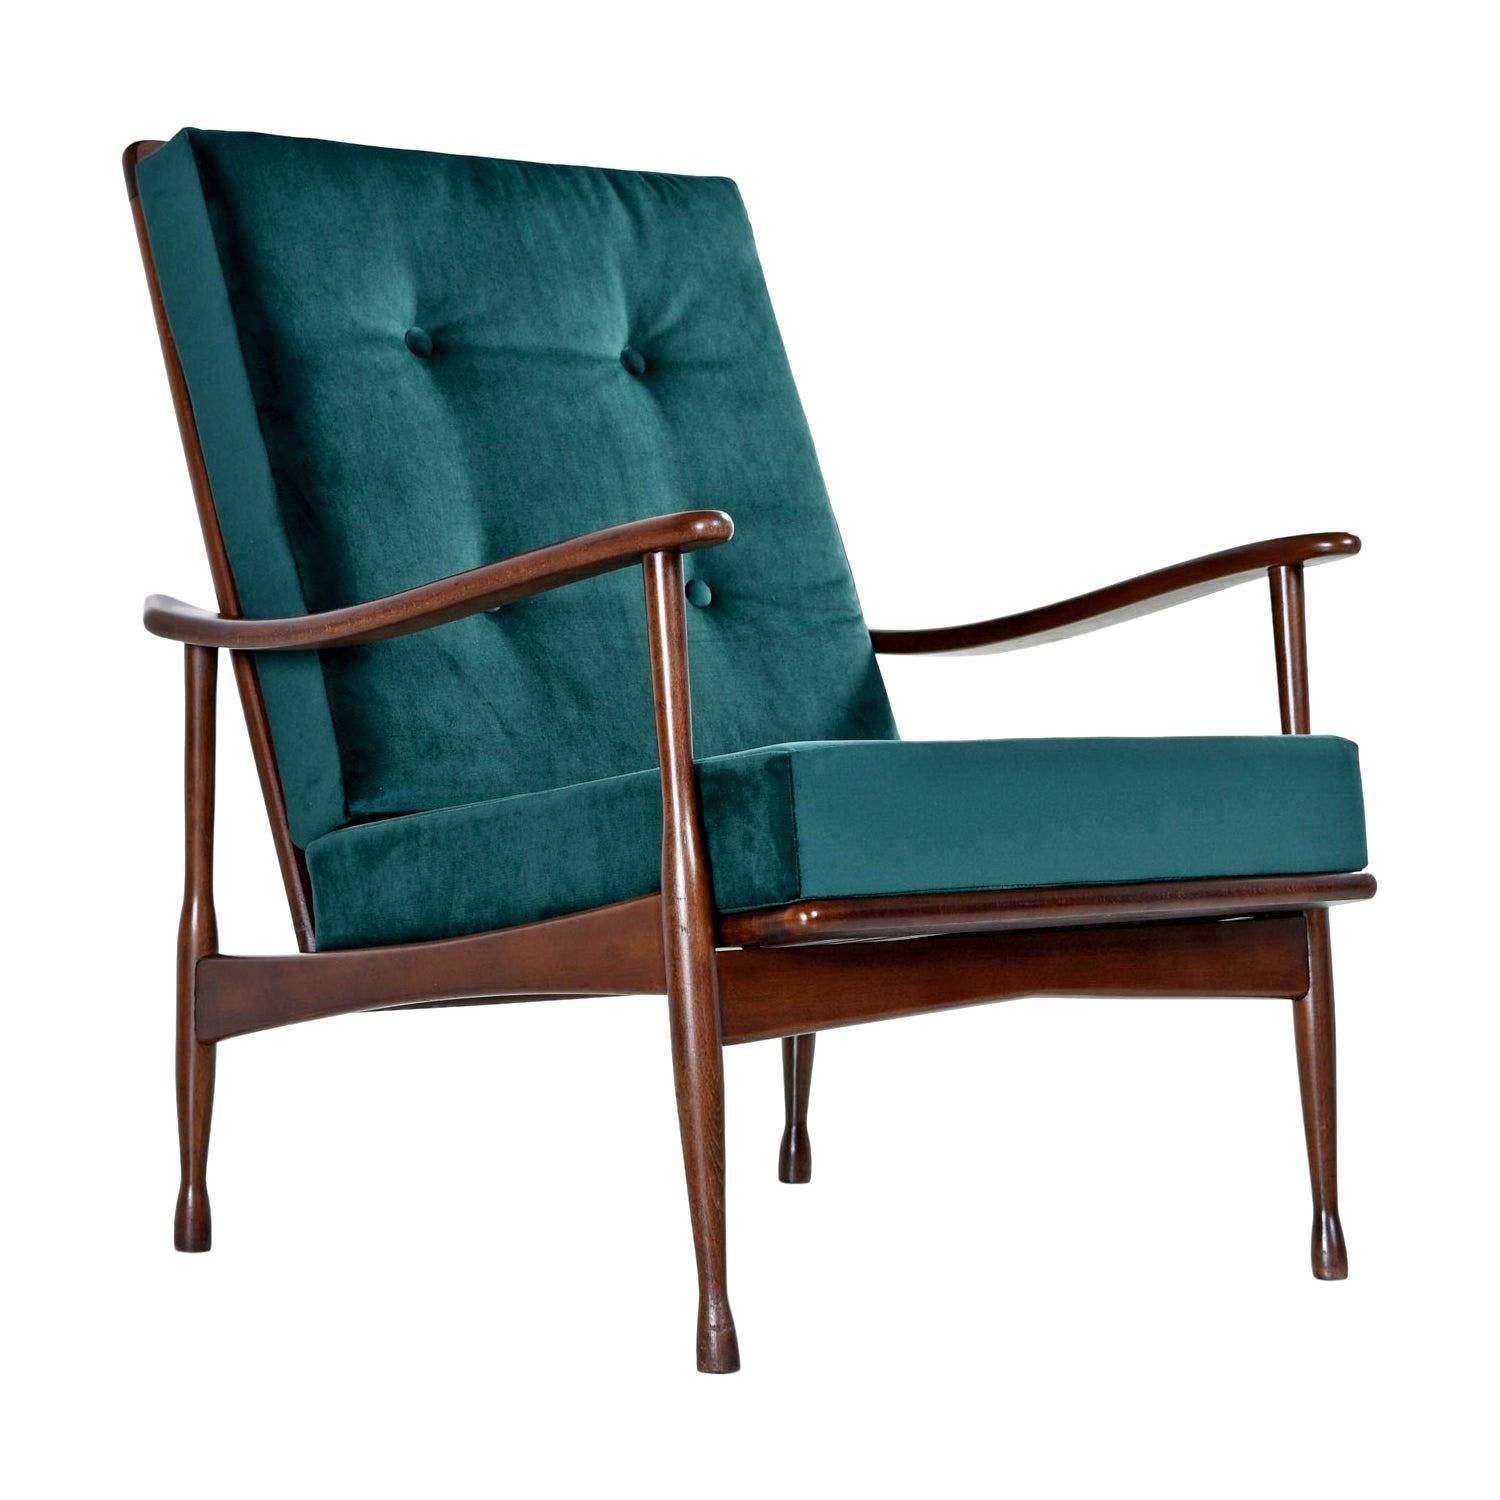 Seemingly typical at first glance, the frame appears familiar, but it exhibits numerous design accents. Subtle, bow-tie angles on the stretchers and headrest section are a perfect contrast to the scooped arms and hourglass shaped tapered ankles on